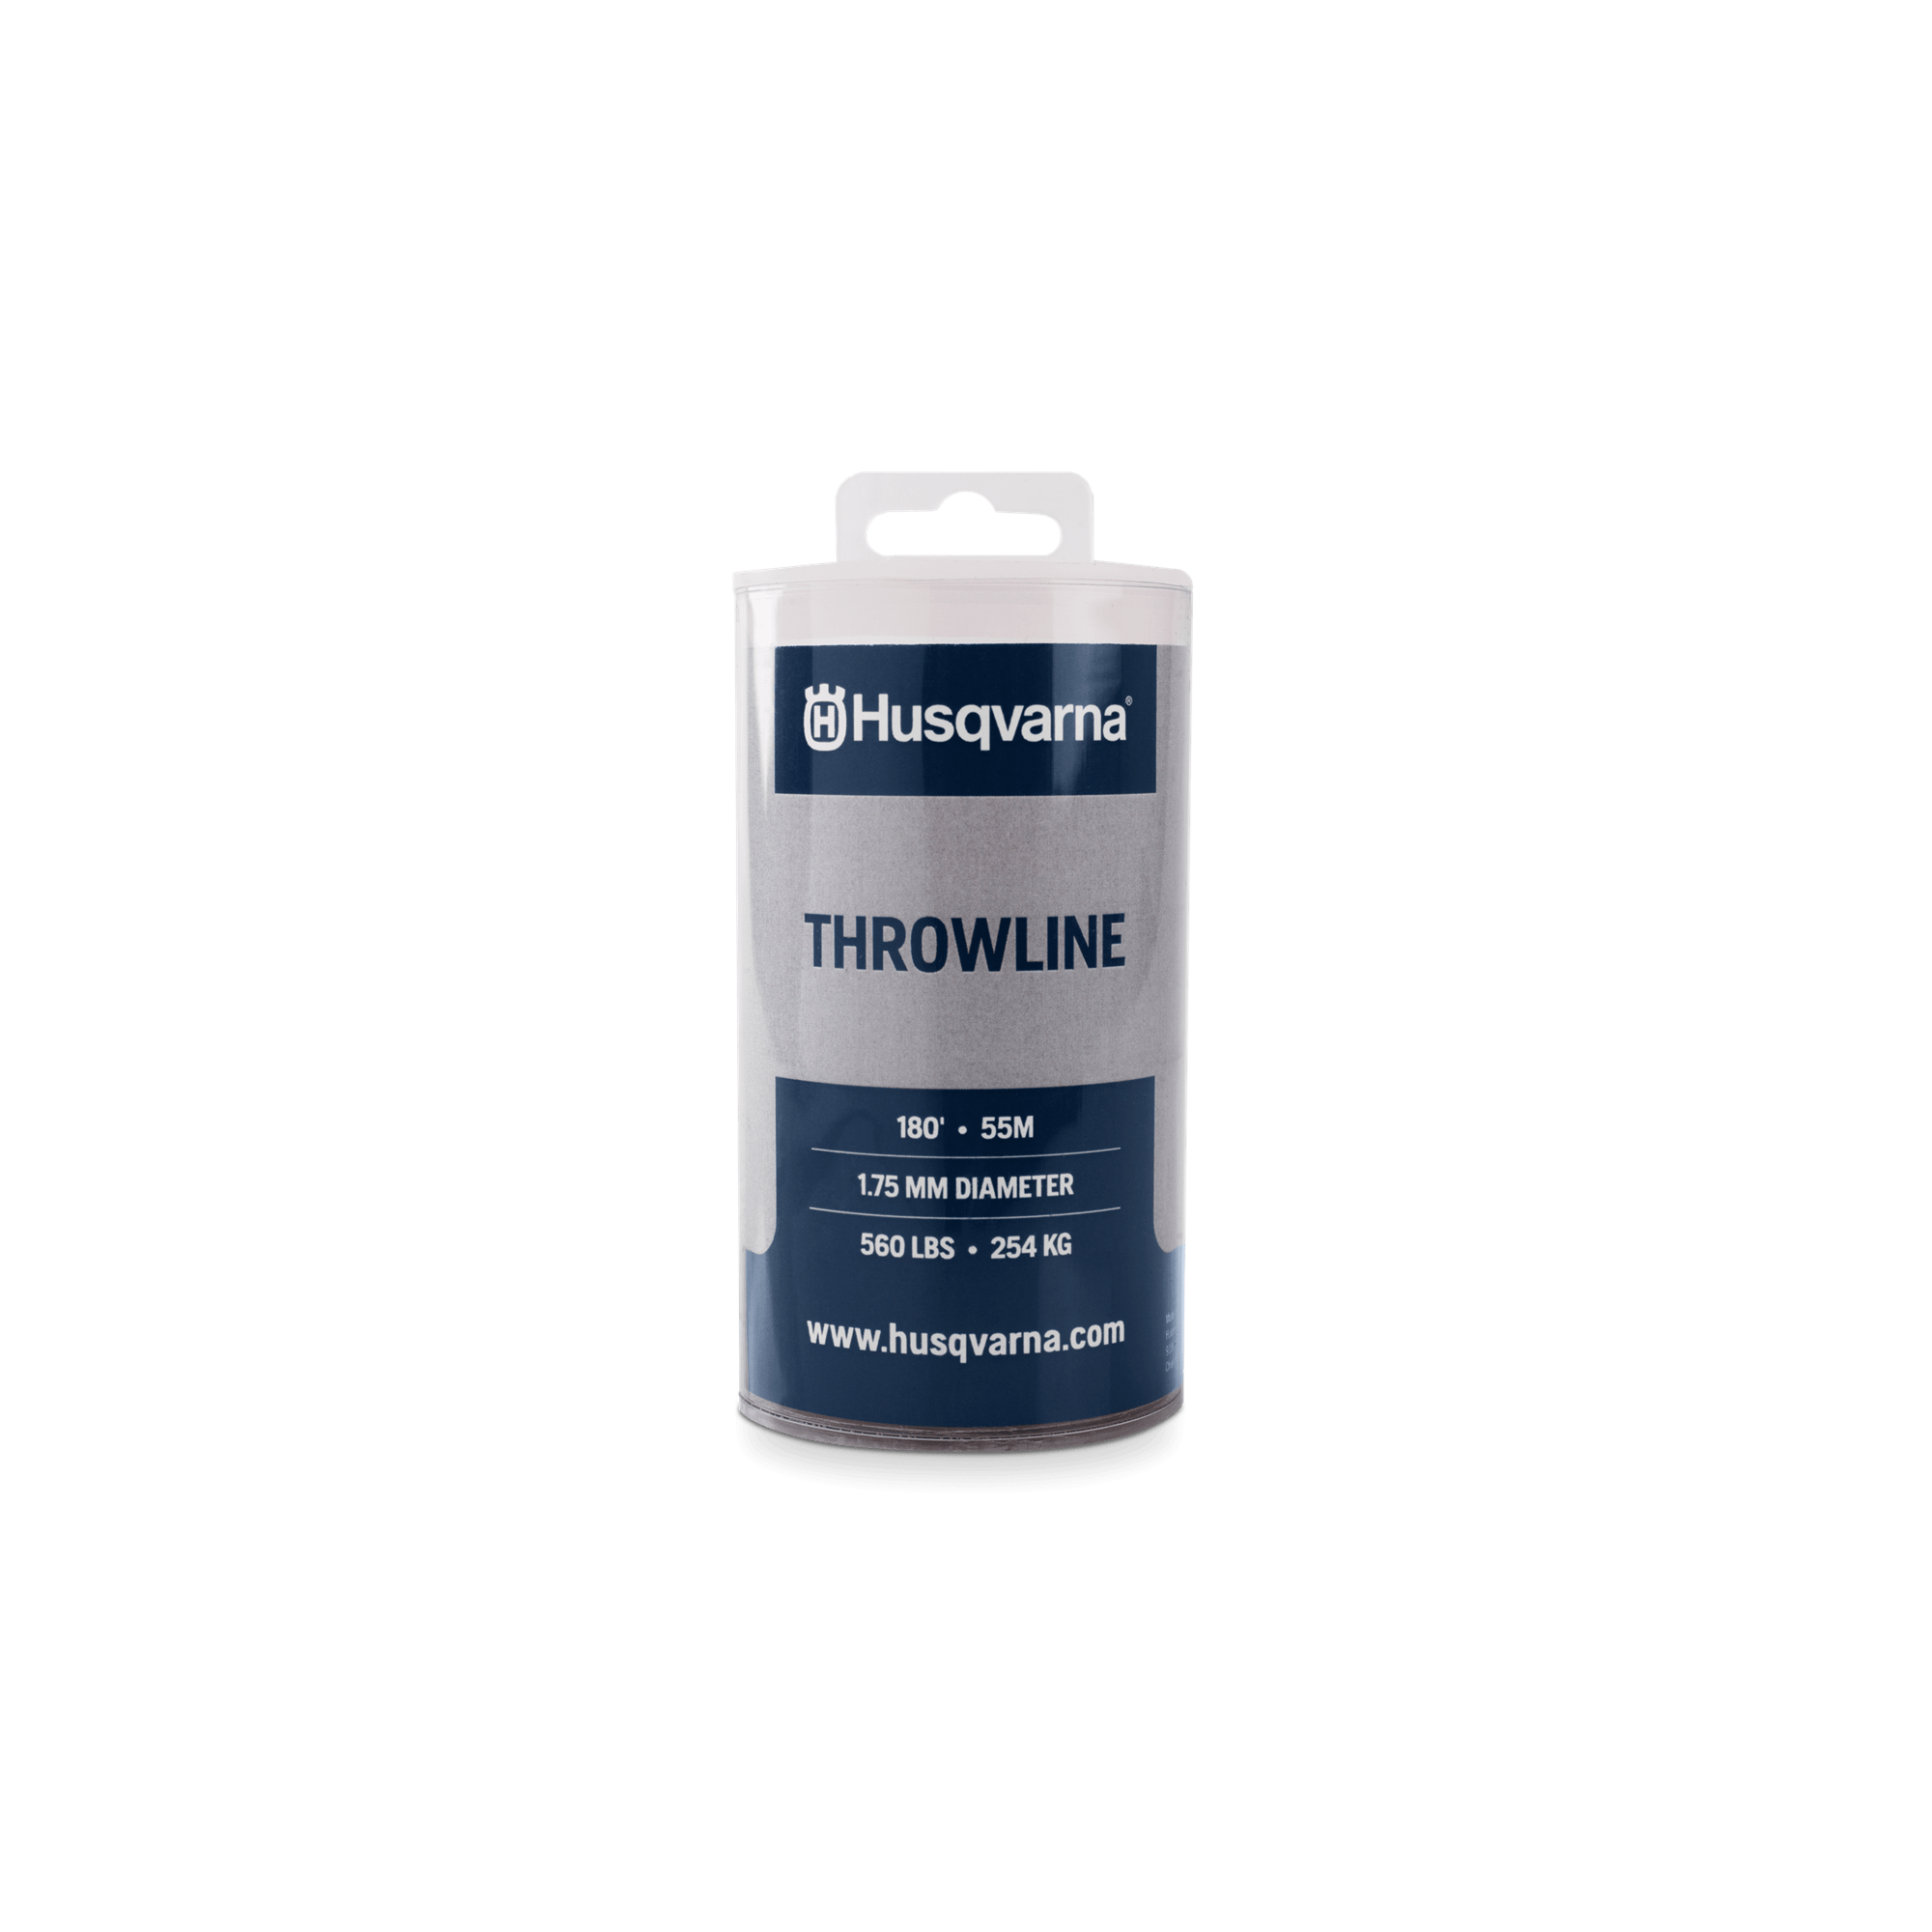 Image for Throwline                                                                                                                        from HusqvarnaB2C